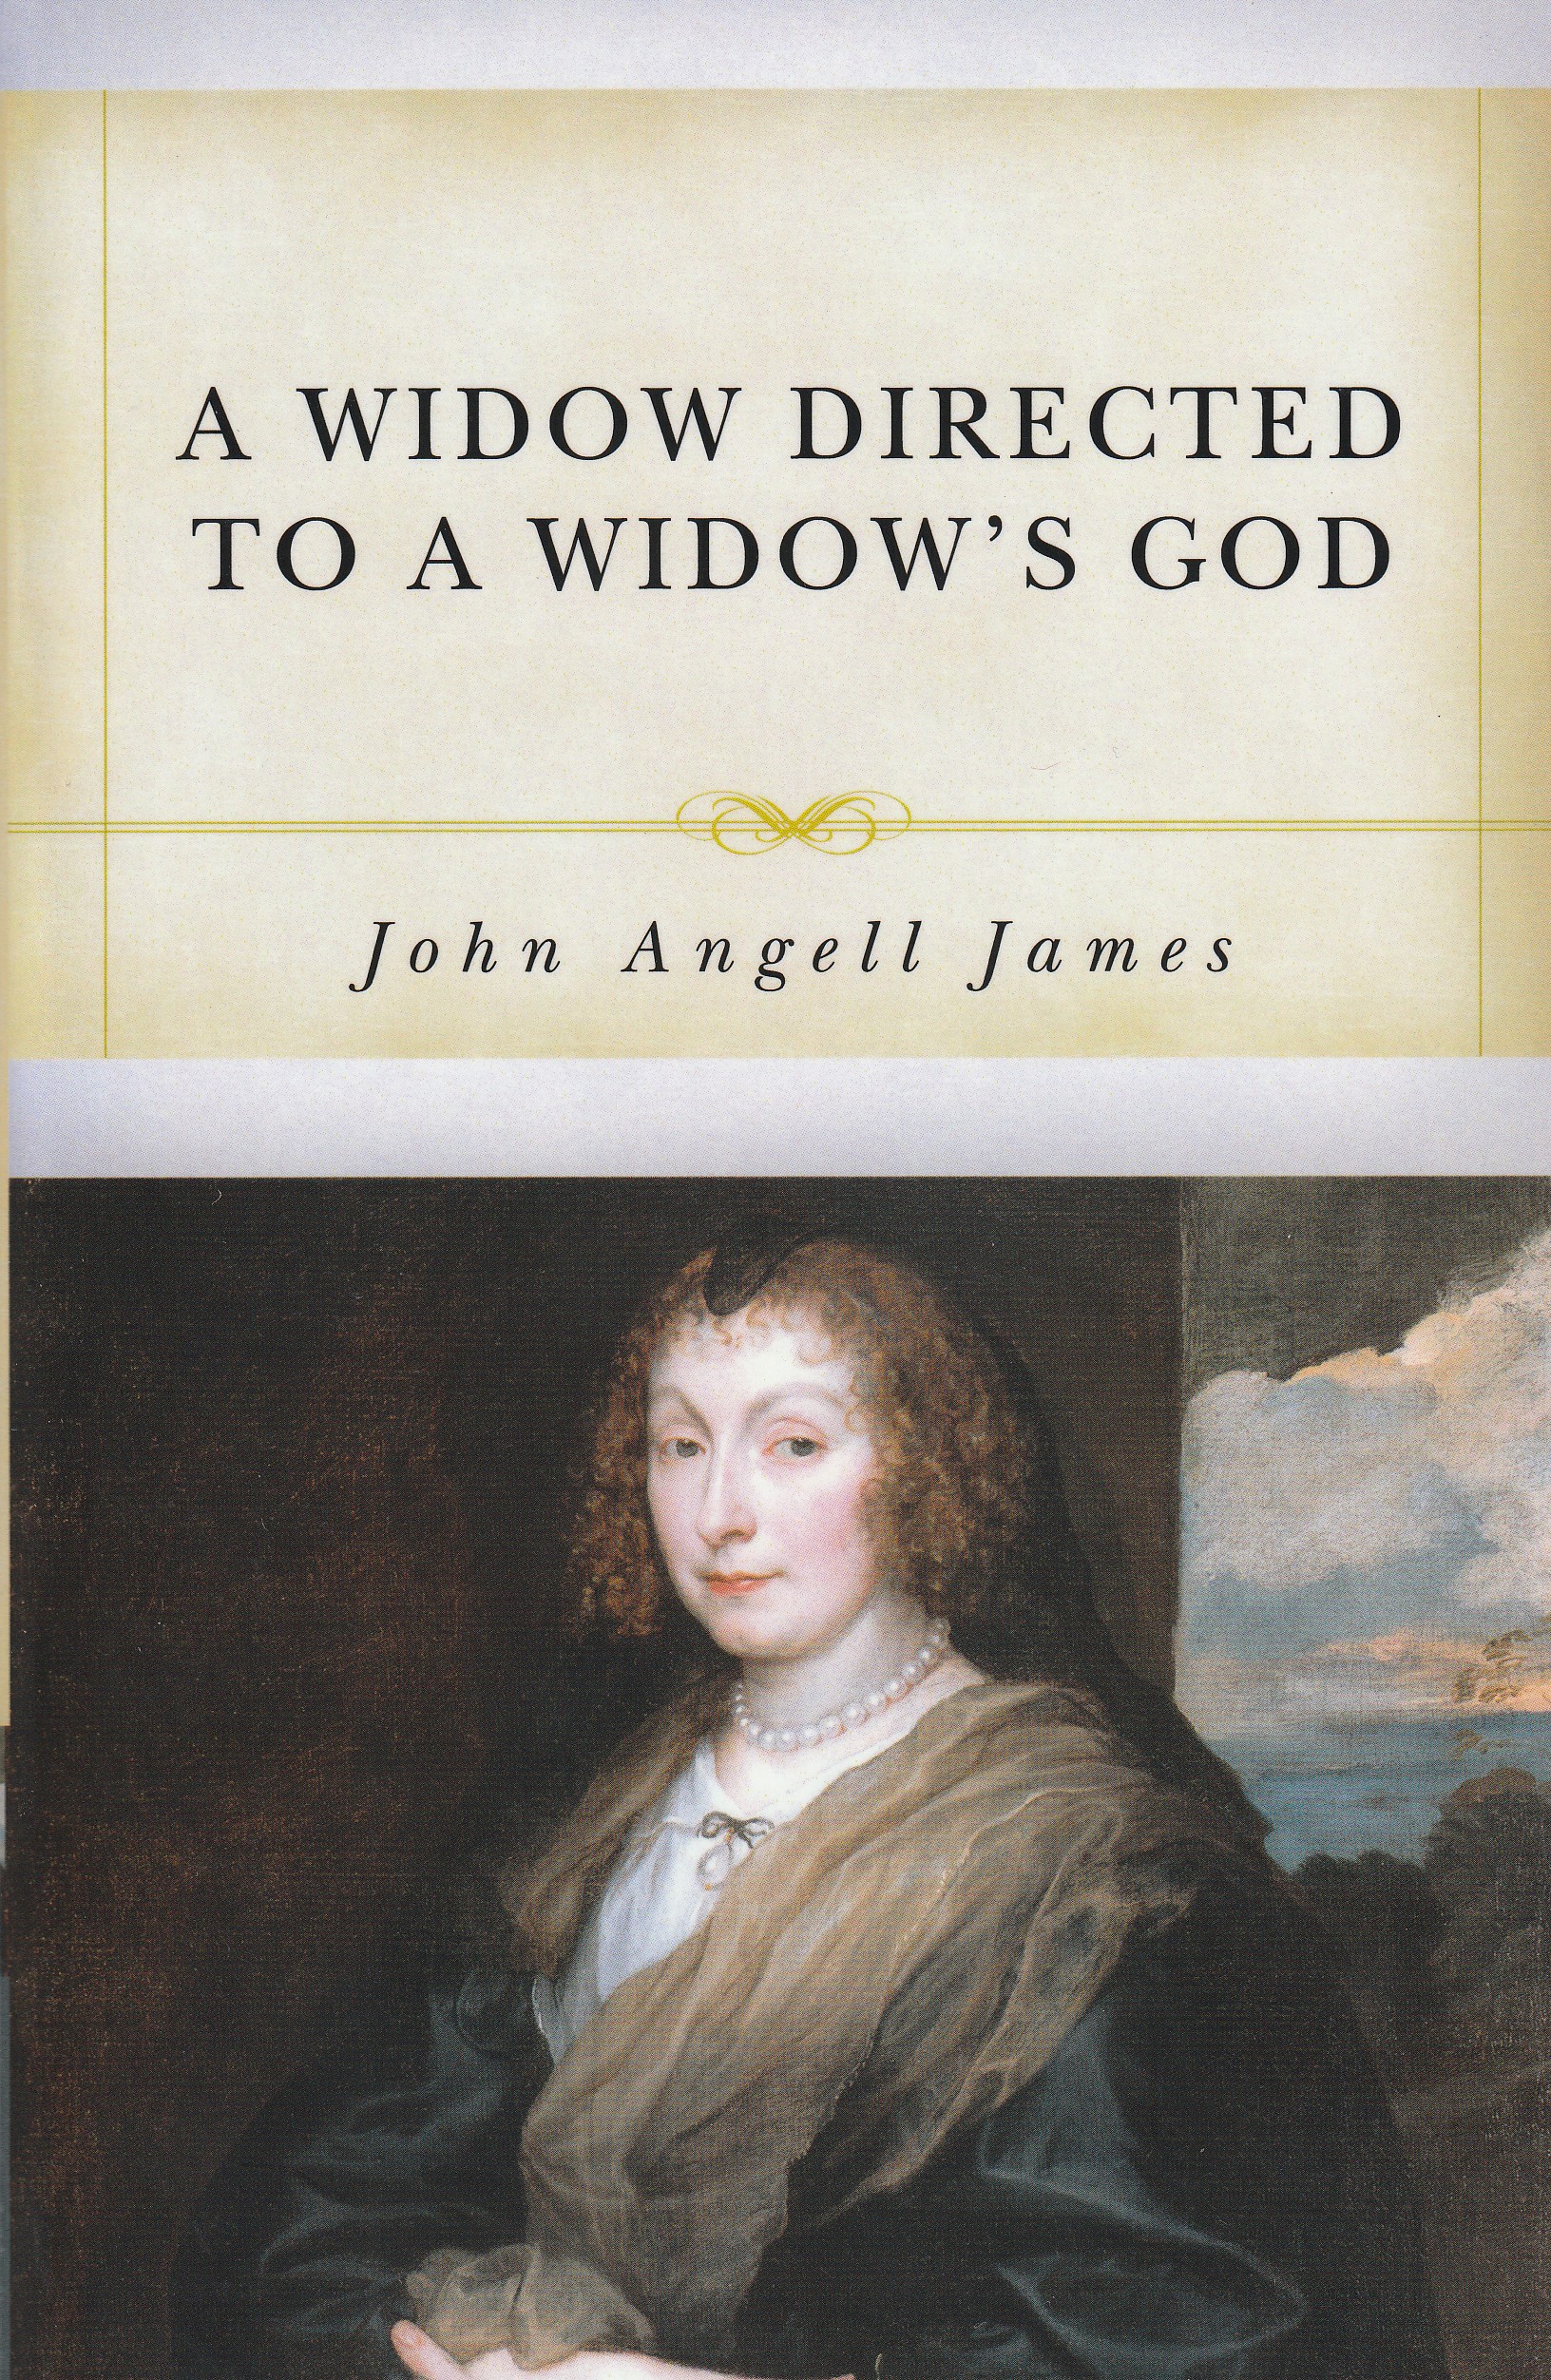 A Widow Directed to a Widow's God (paperback)